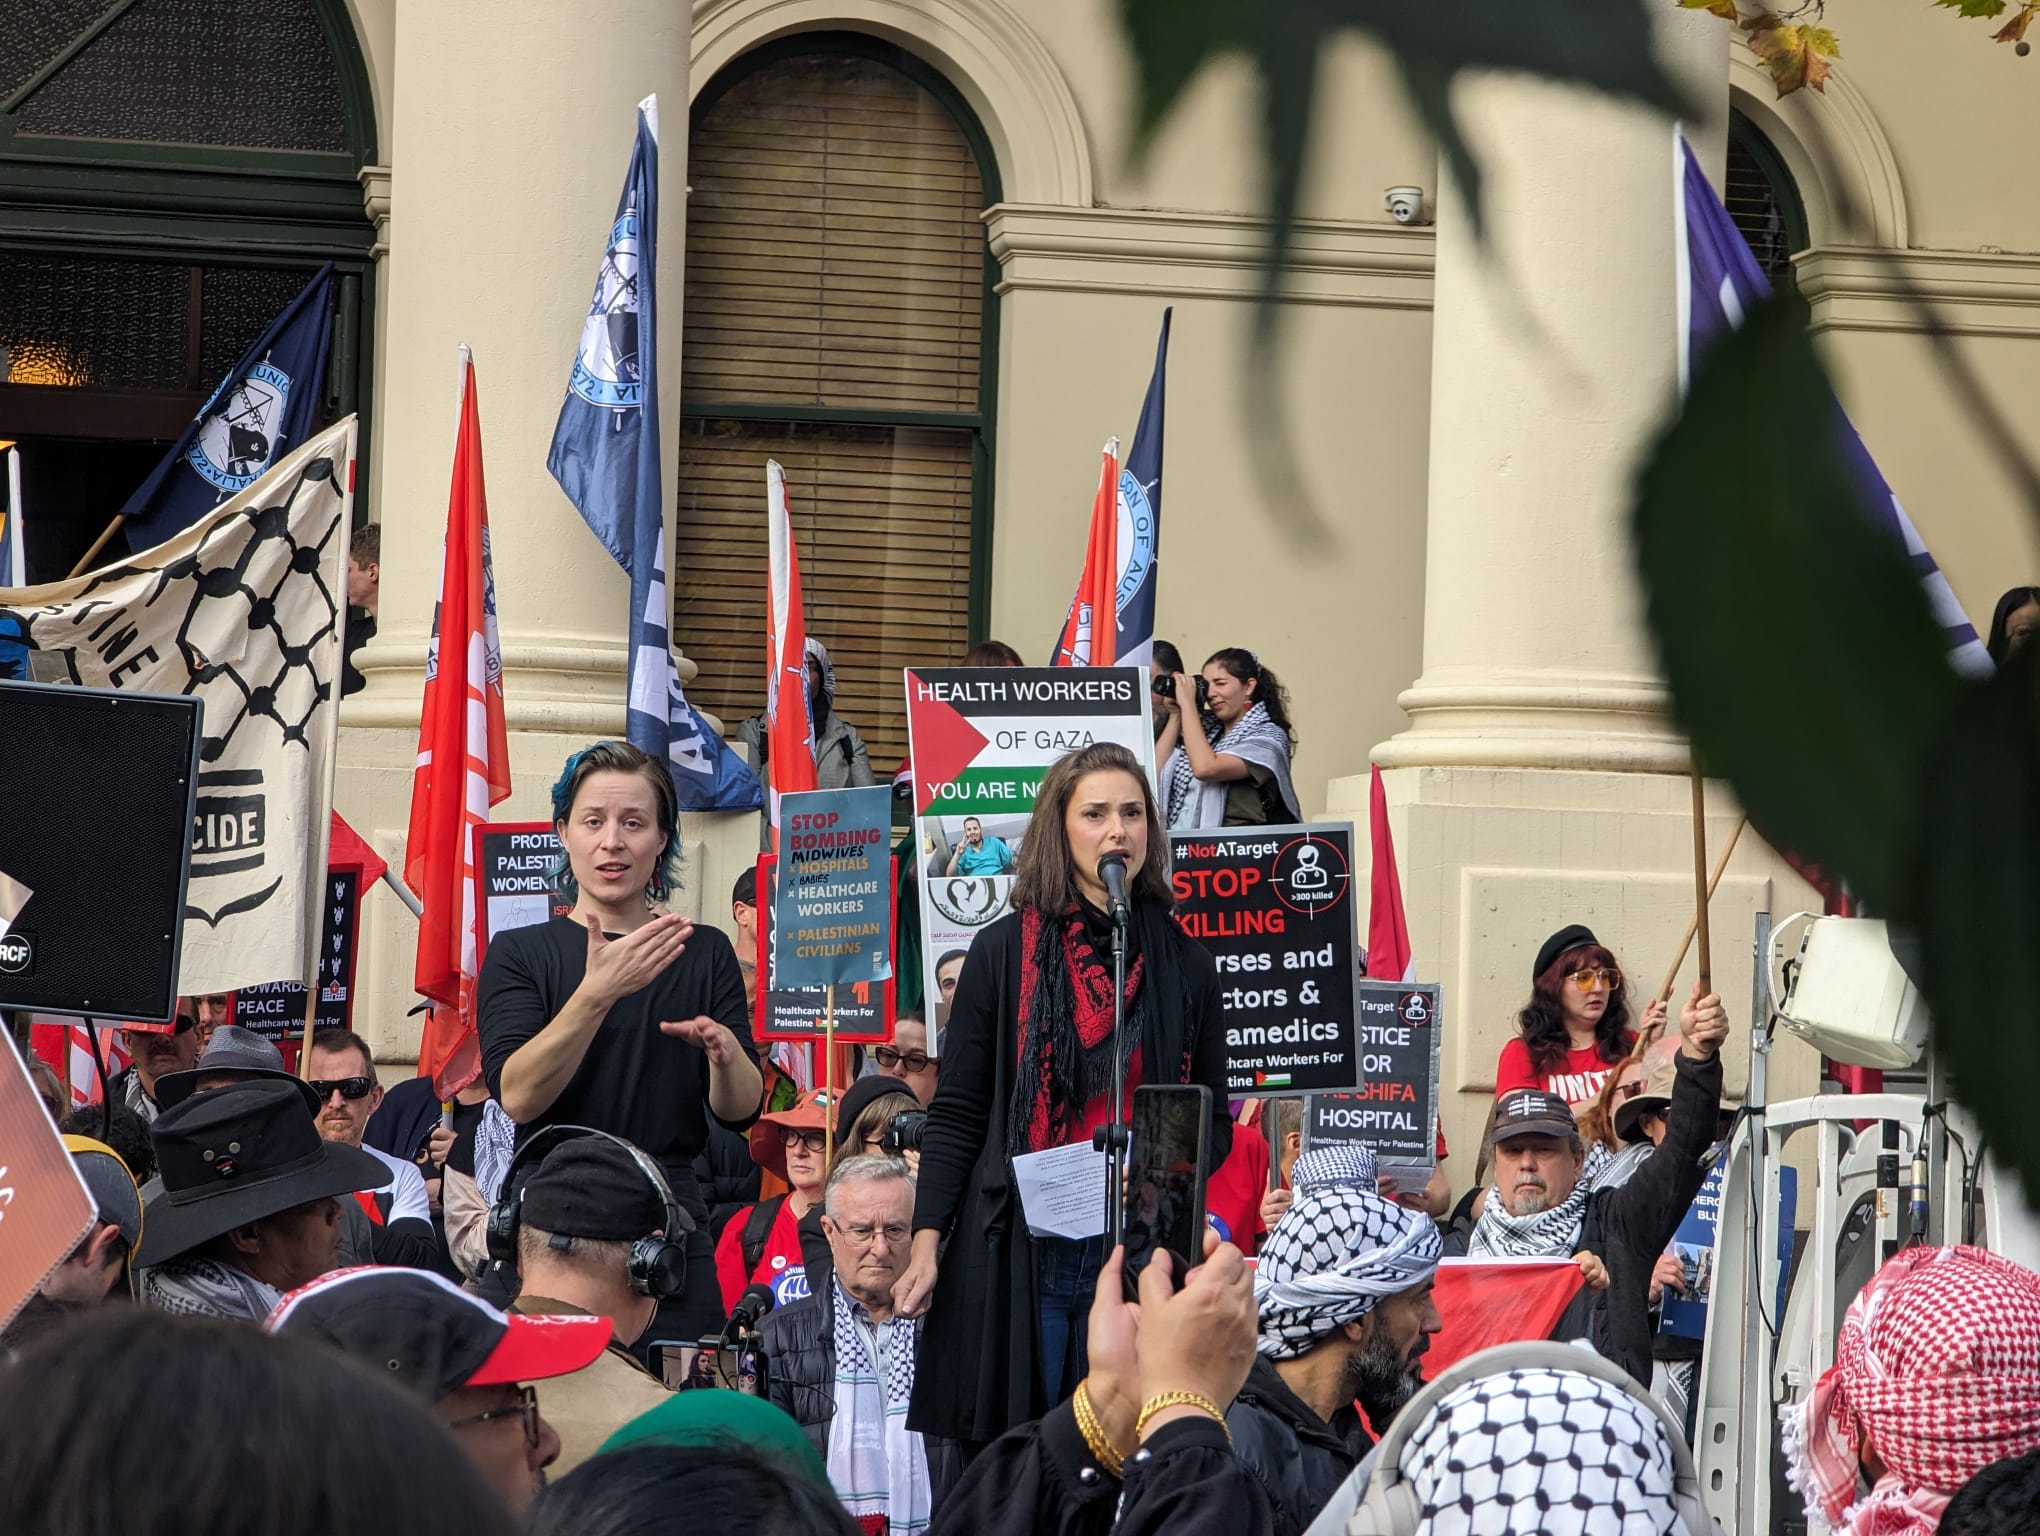 Melbourne May day rally